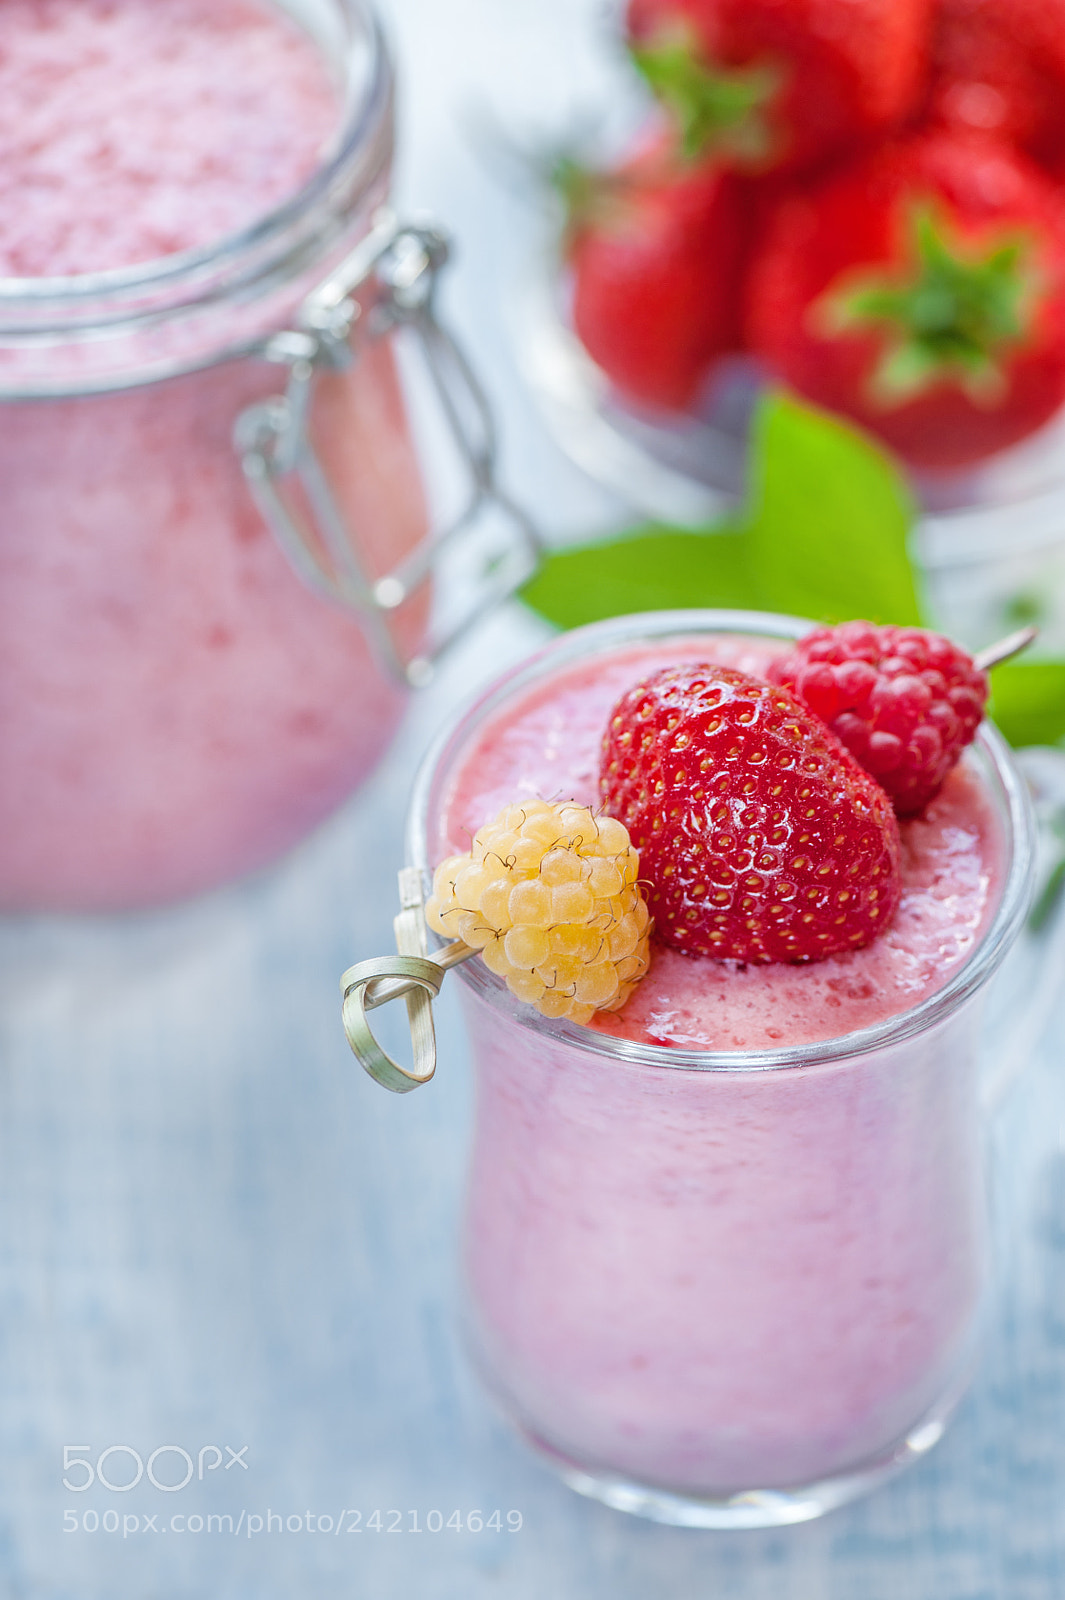 Nikon D700 sample photo. Detox smoothie with strawberries photography